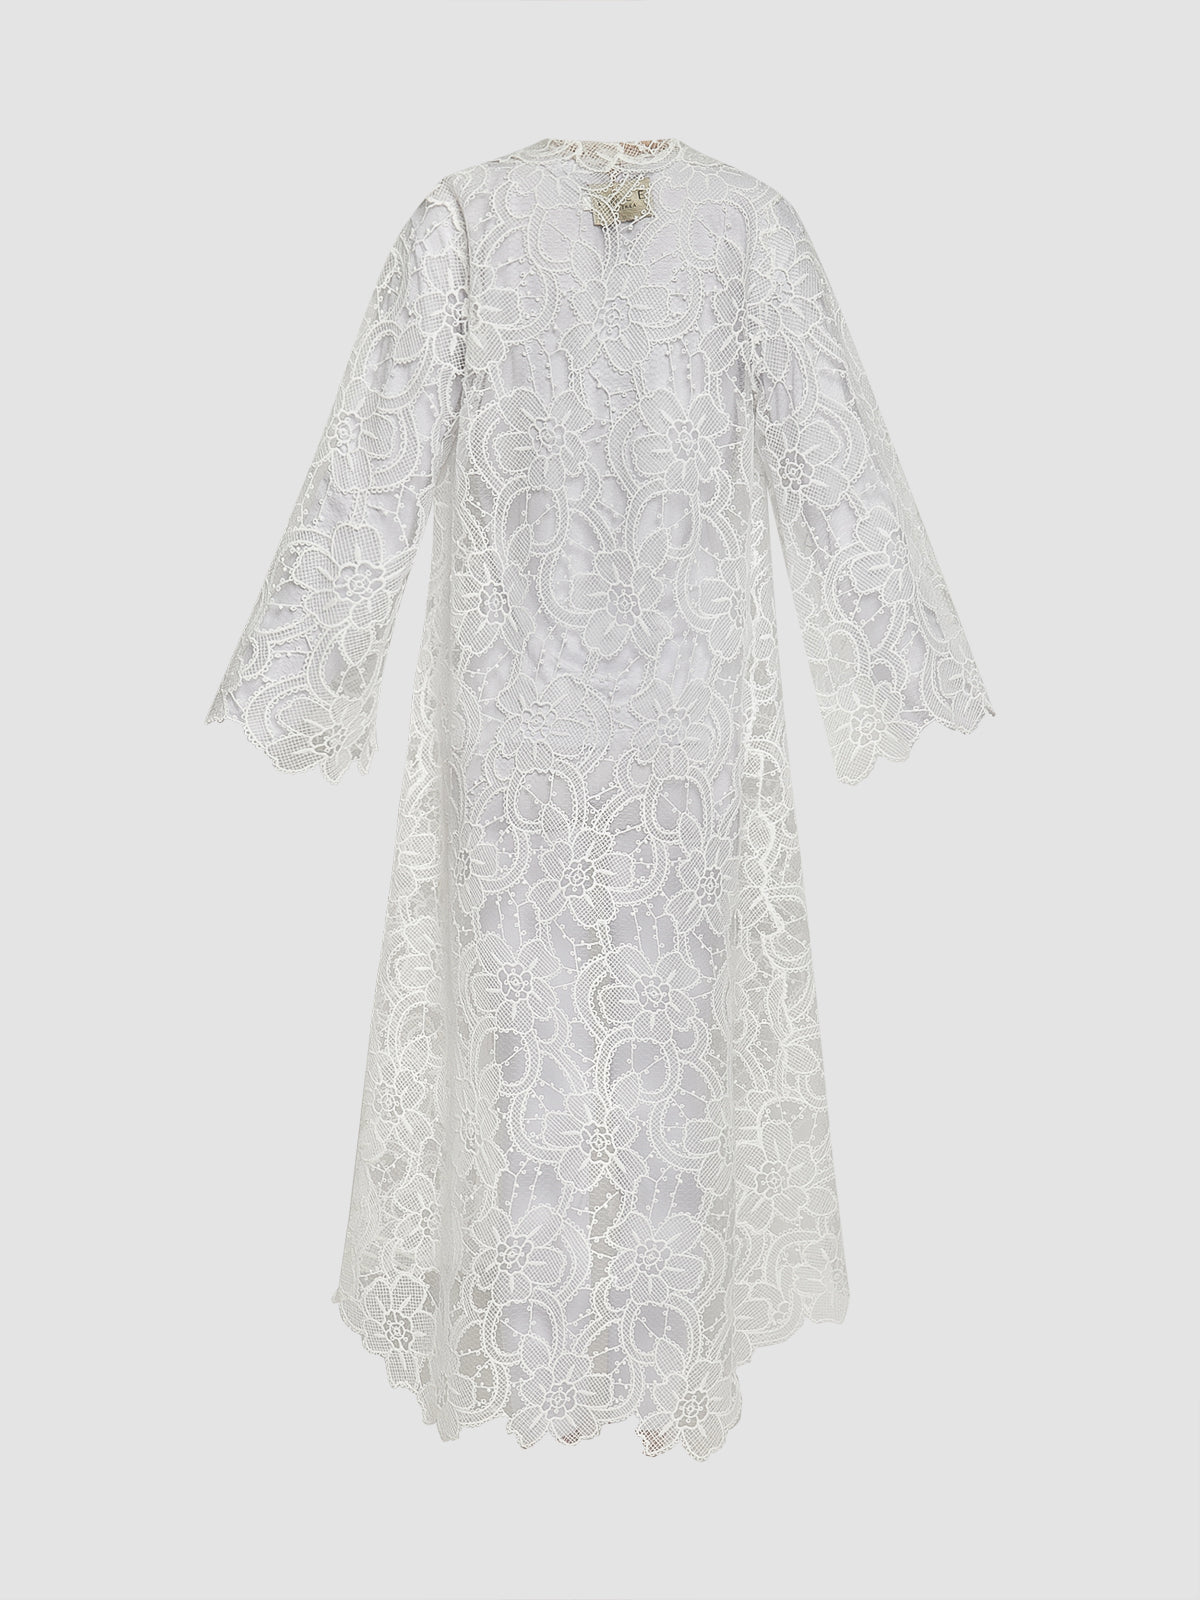 White lace Overlap Collar long-sleeved outer